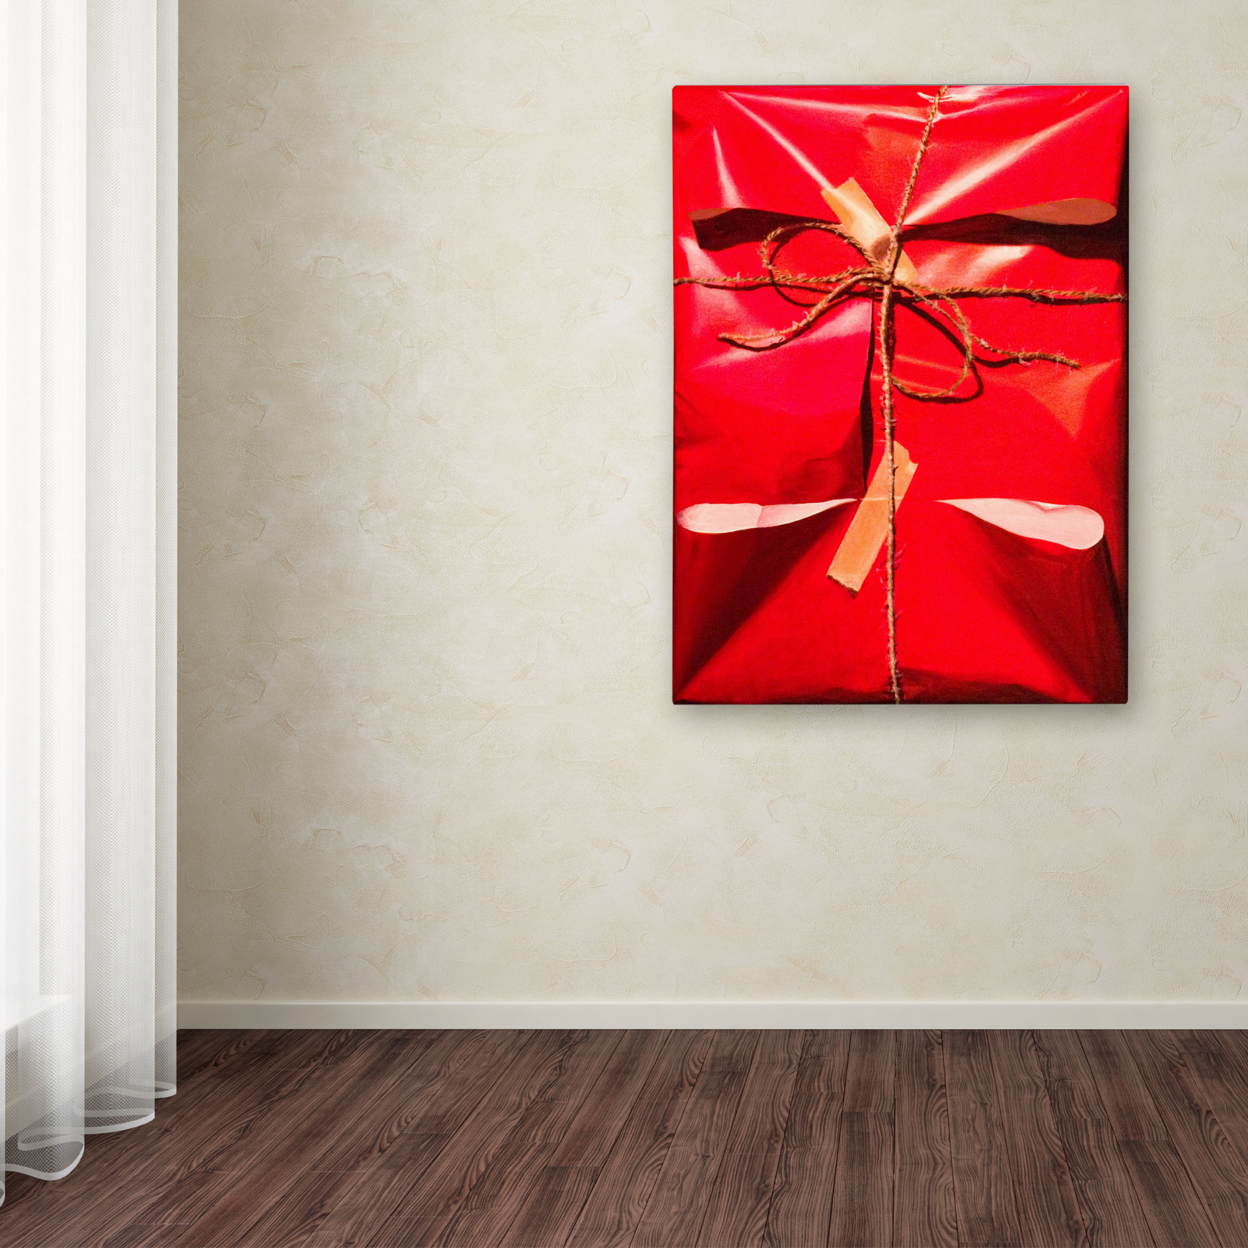 Roderick Stevens 'Red Wrap' Canvas Wall Art 35 X 47 Inches